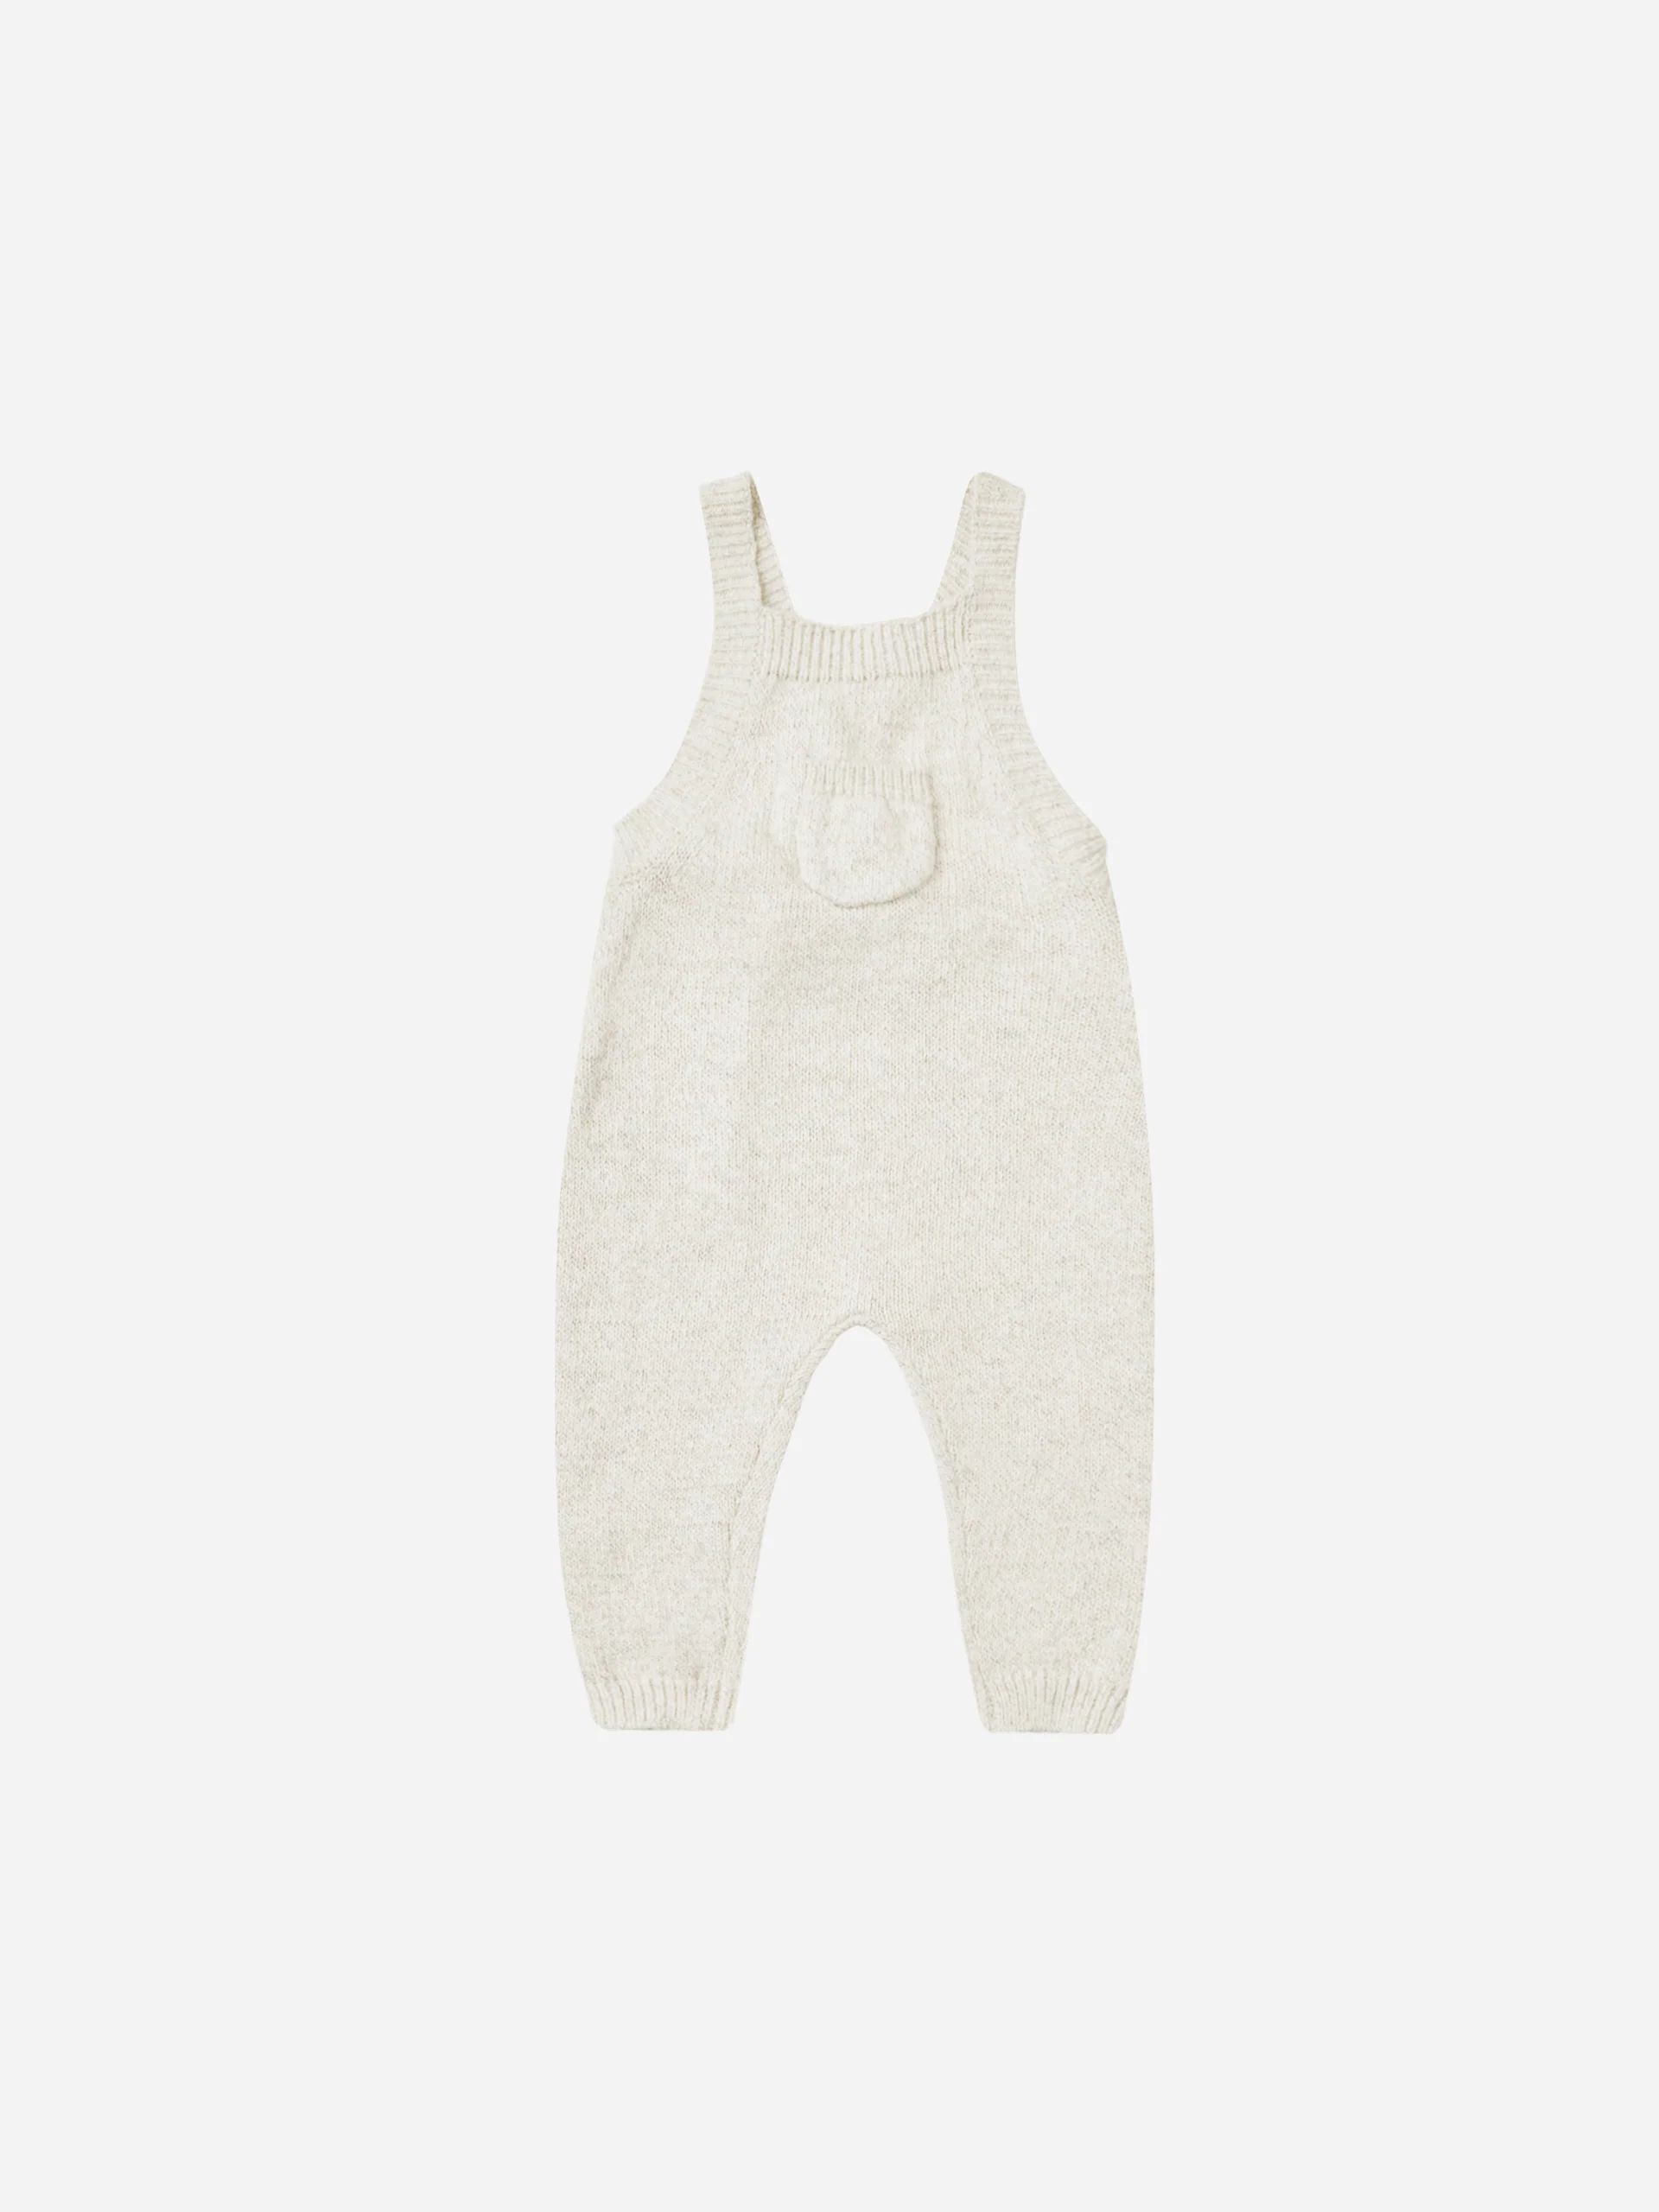 Knit Overalls || Ivory | Rylee + Cru